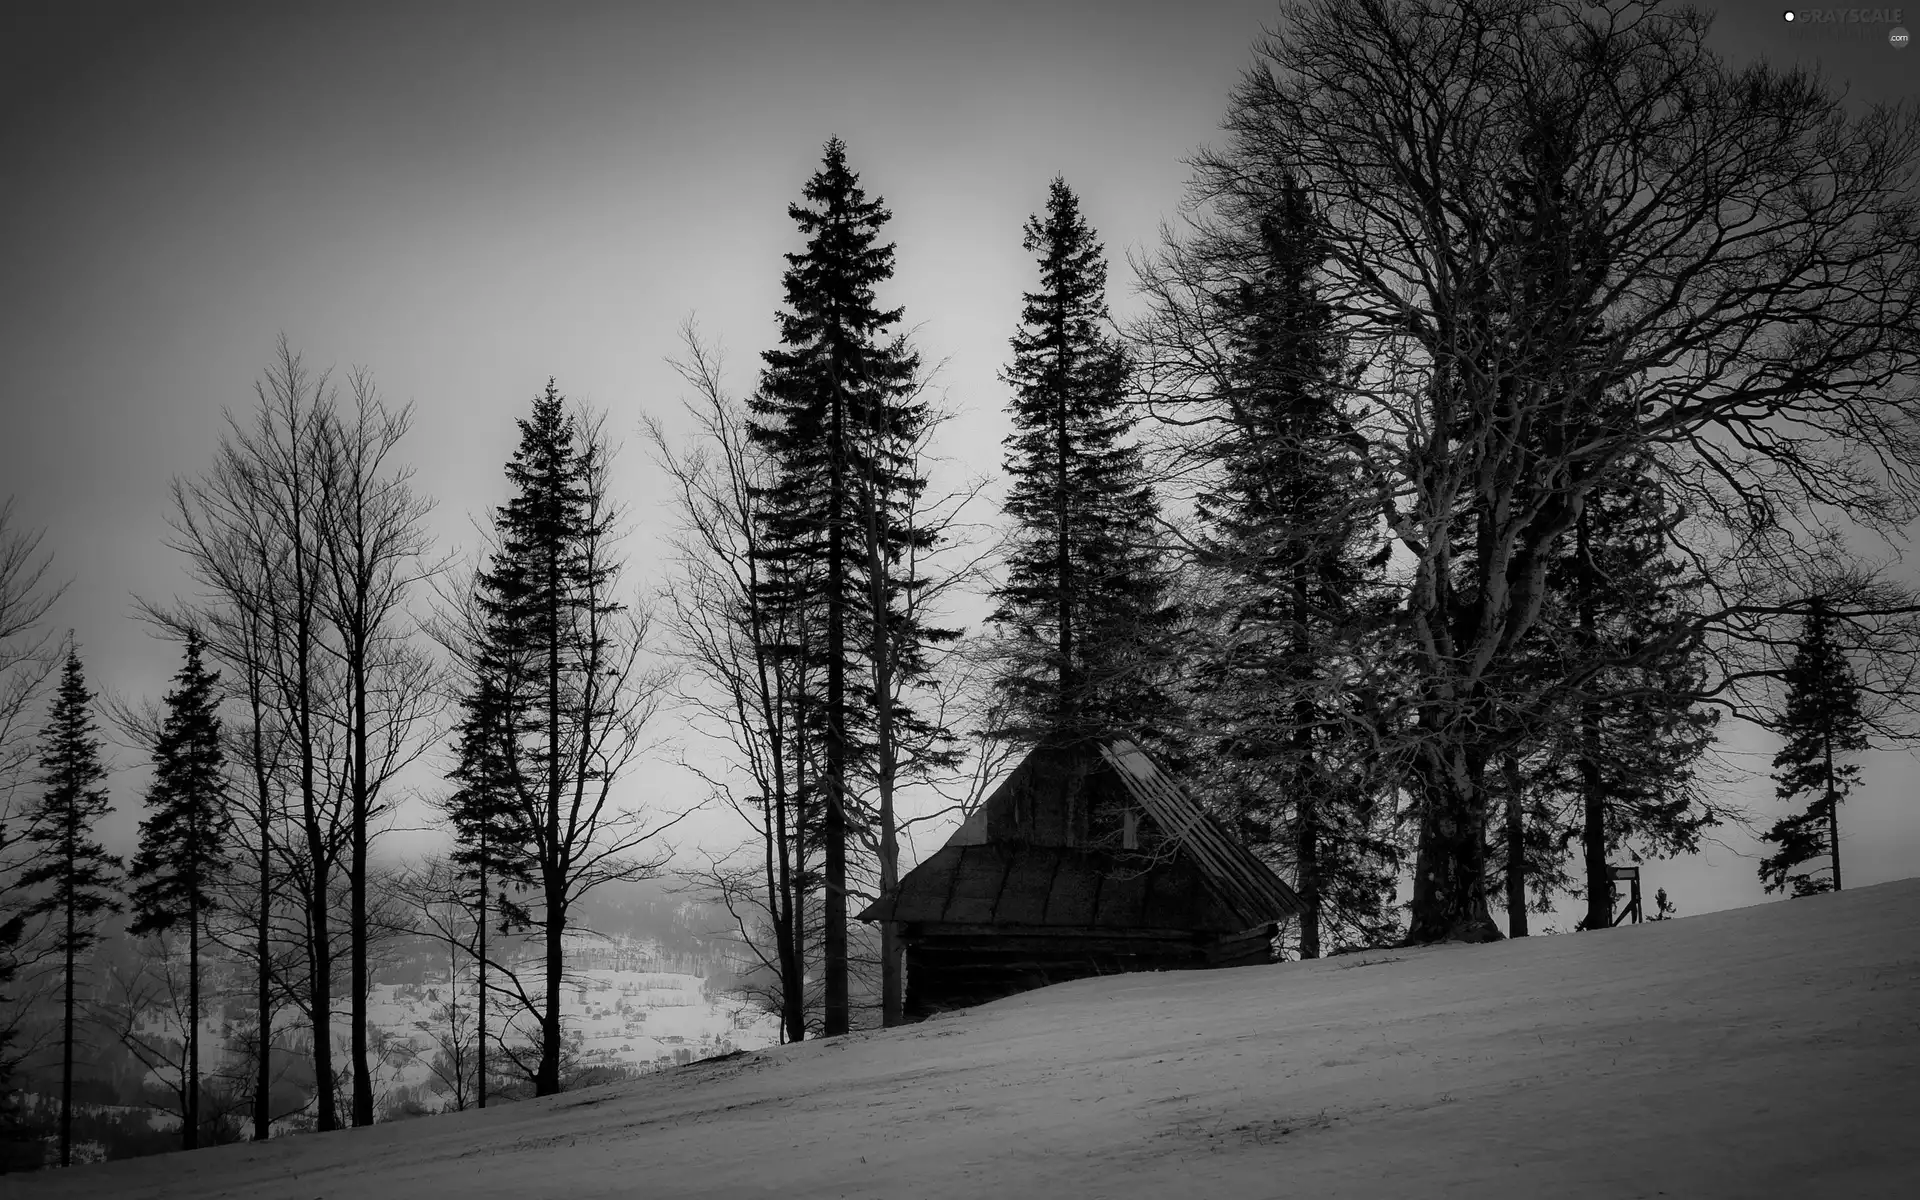 trees, shed, Dusk, winter, viewes, Mountains